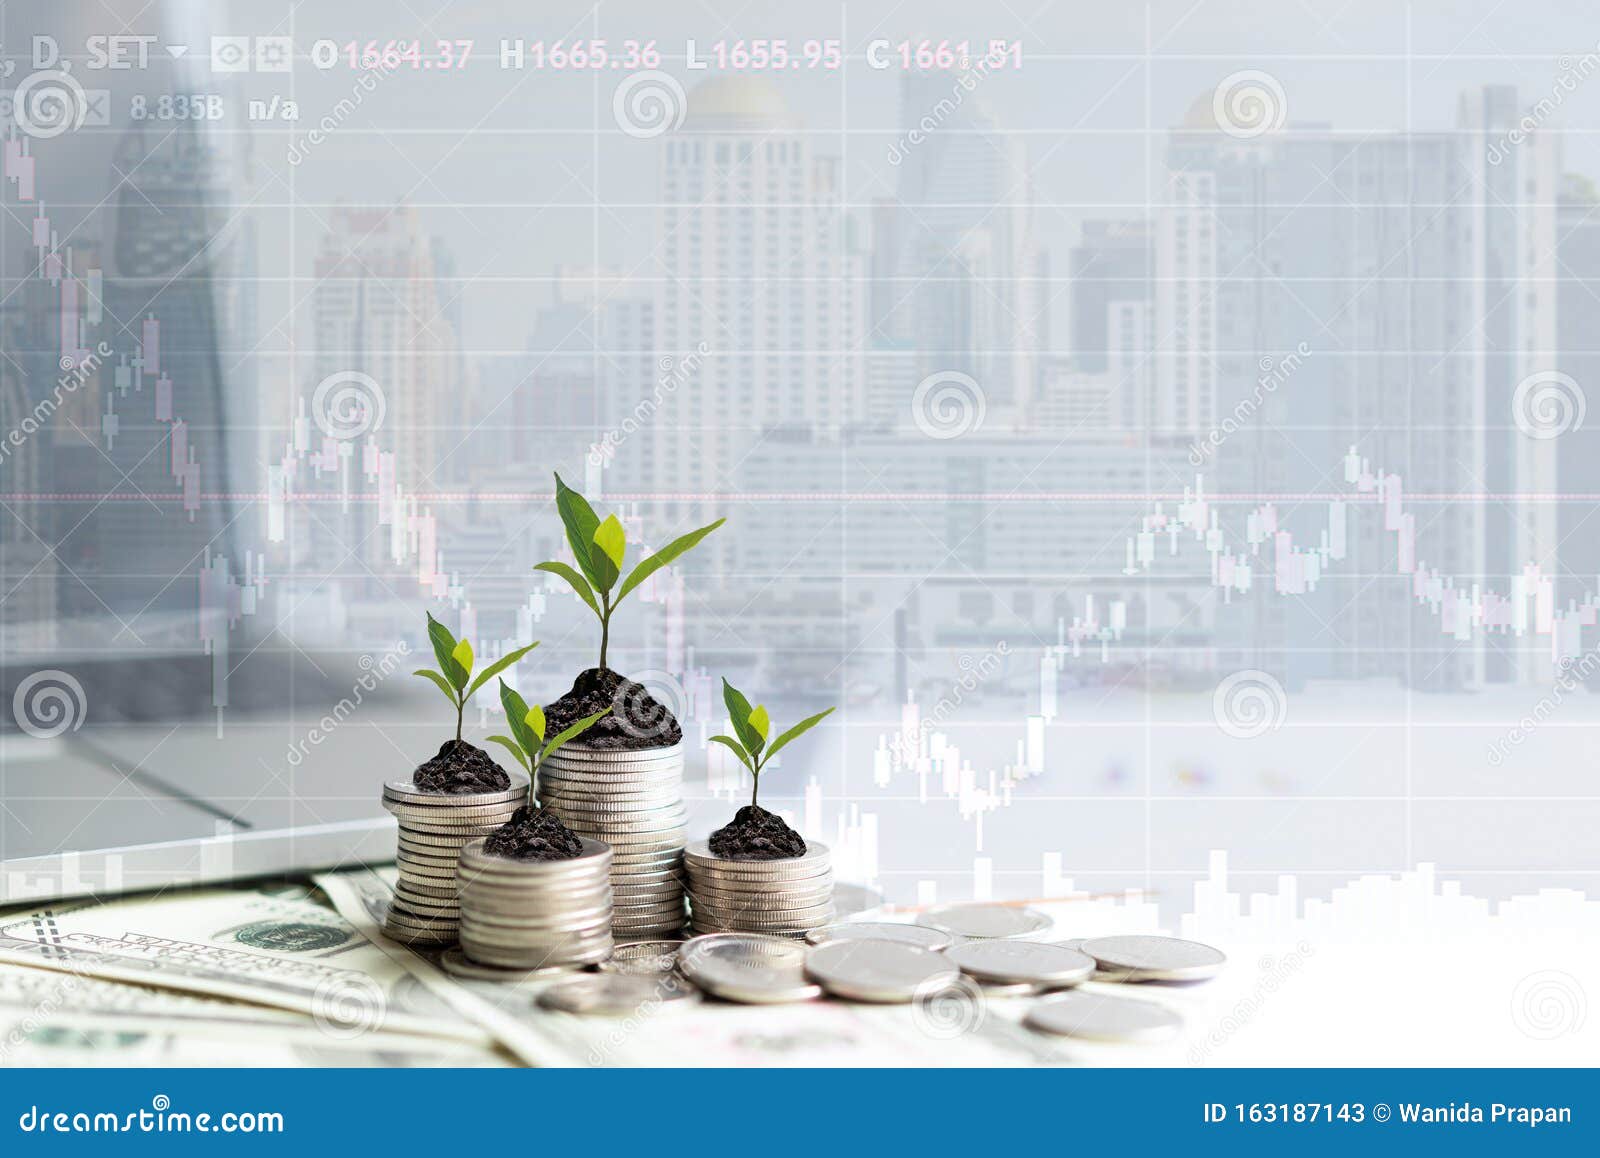 growth plants economic on stack of coins on paper analyze performance financial graph funding with calculate for investment busine